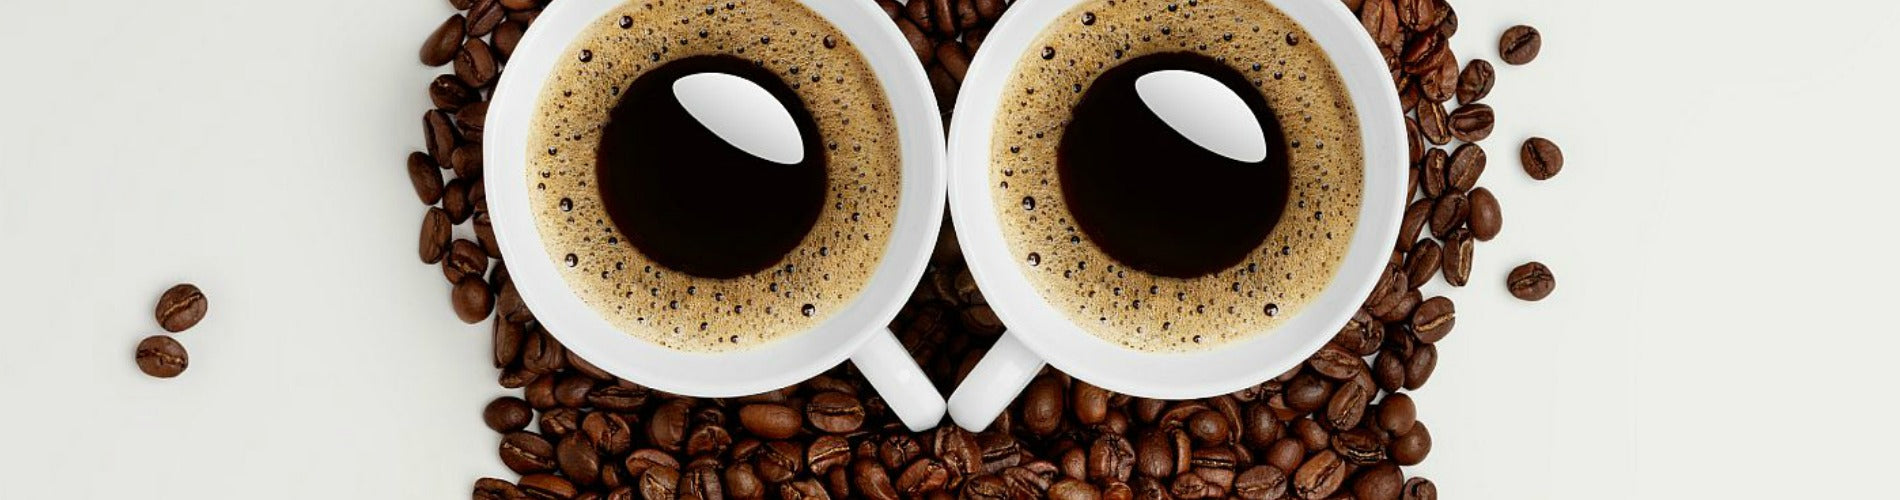 Caffeine – How Does it Affect Our Health?